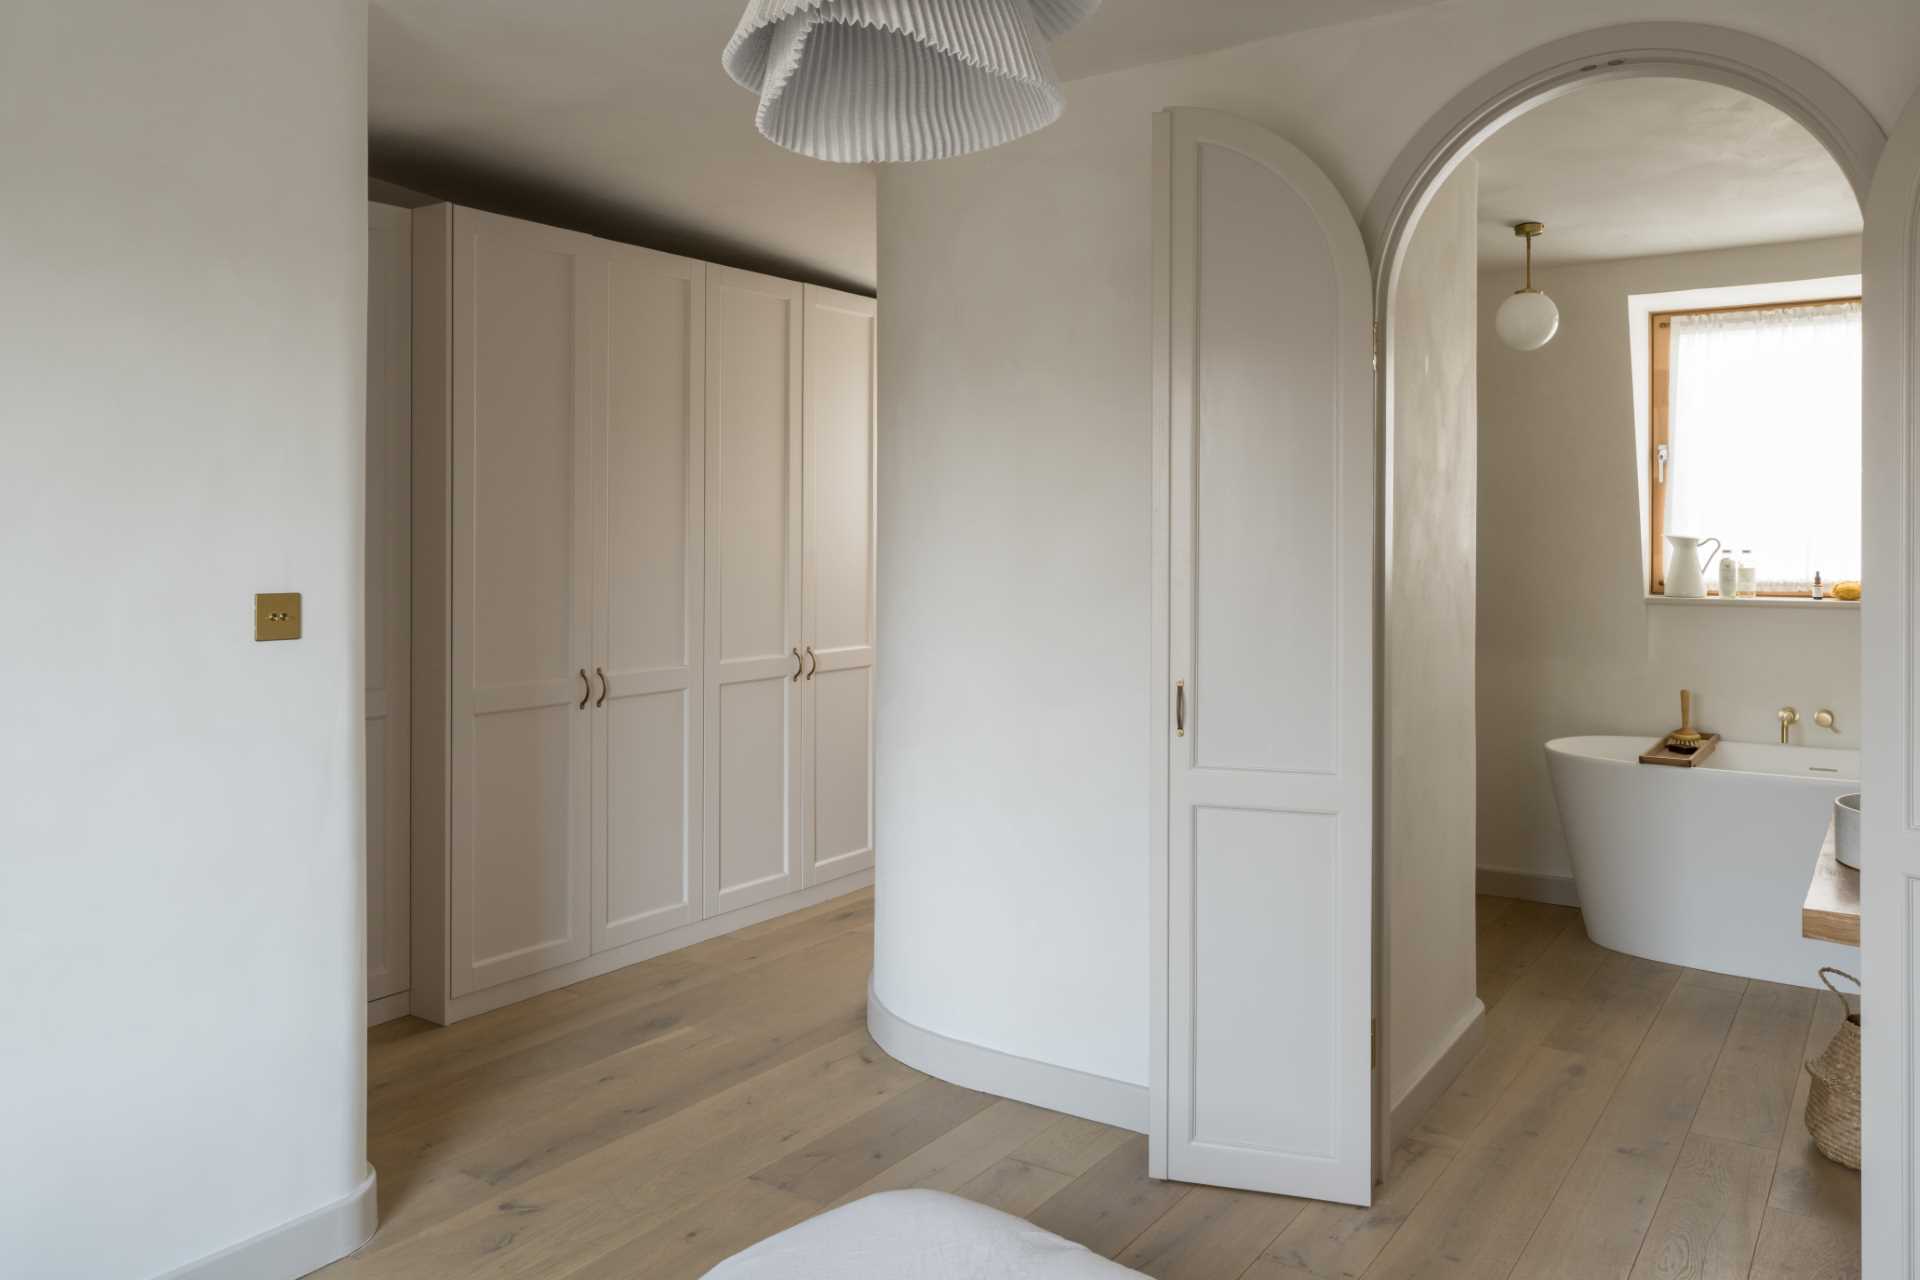 A contemporary primary bedroom suite with a wall of closets and an suite bathroom.